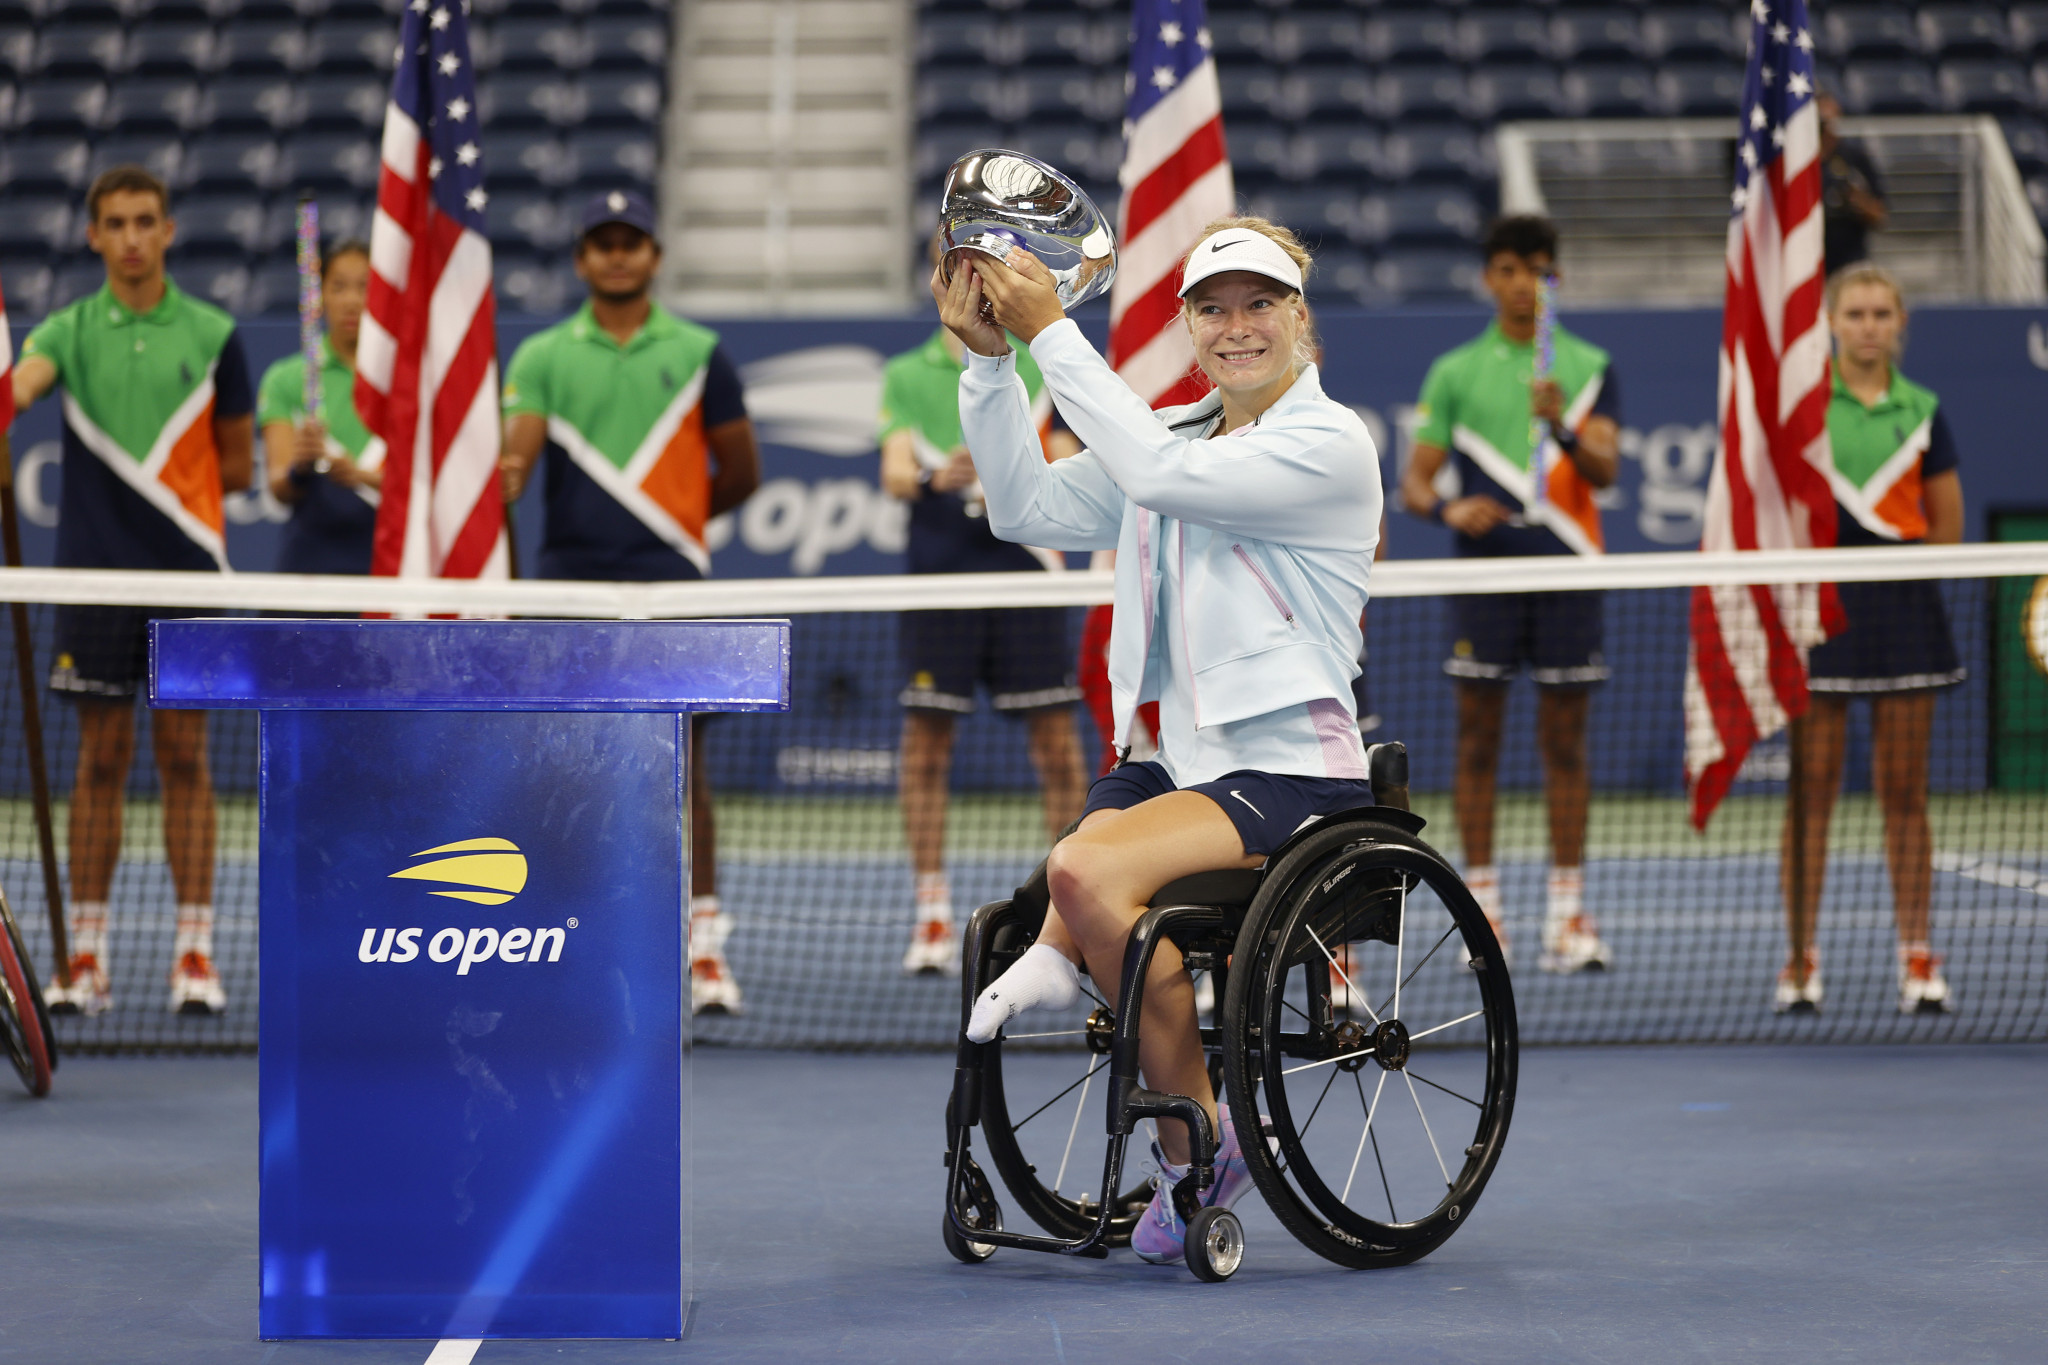 De Groot comes from set down to complete second successive calendar wheelchair singles Grand Slam at US Open